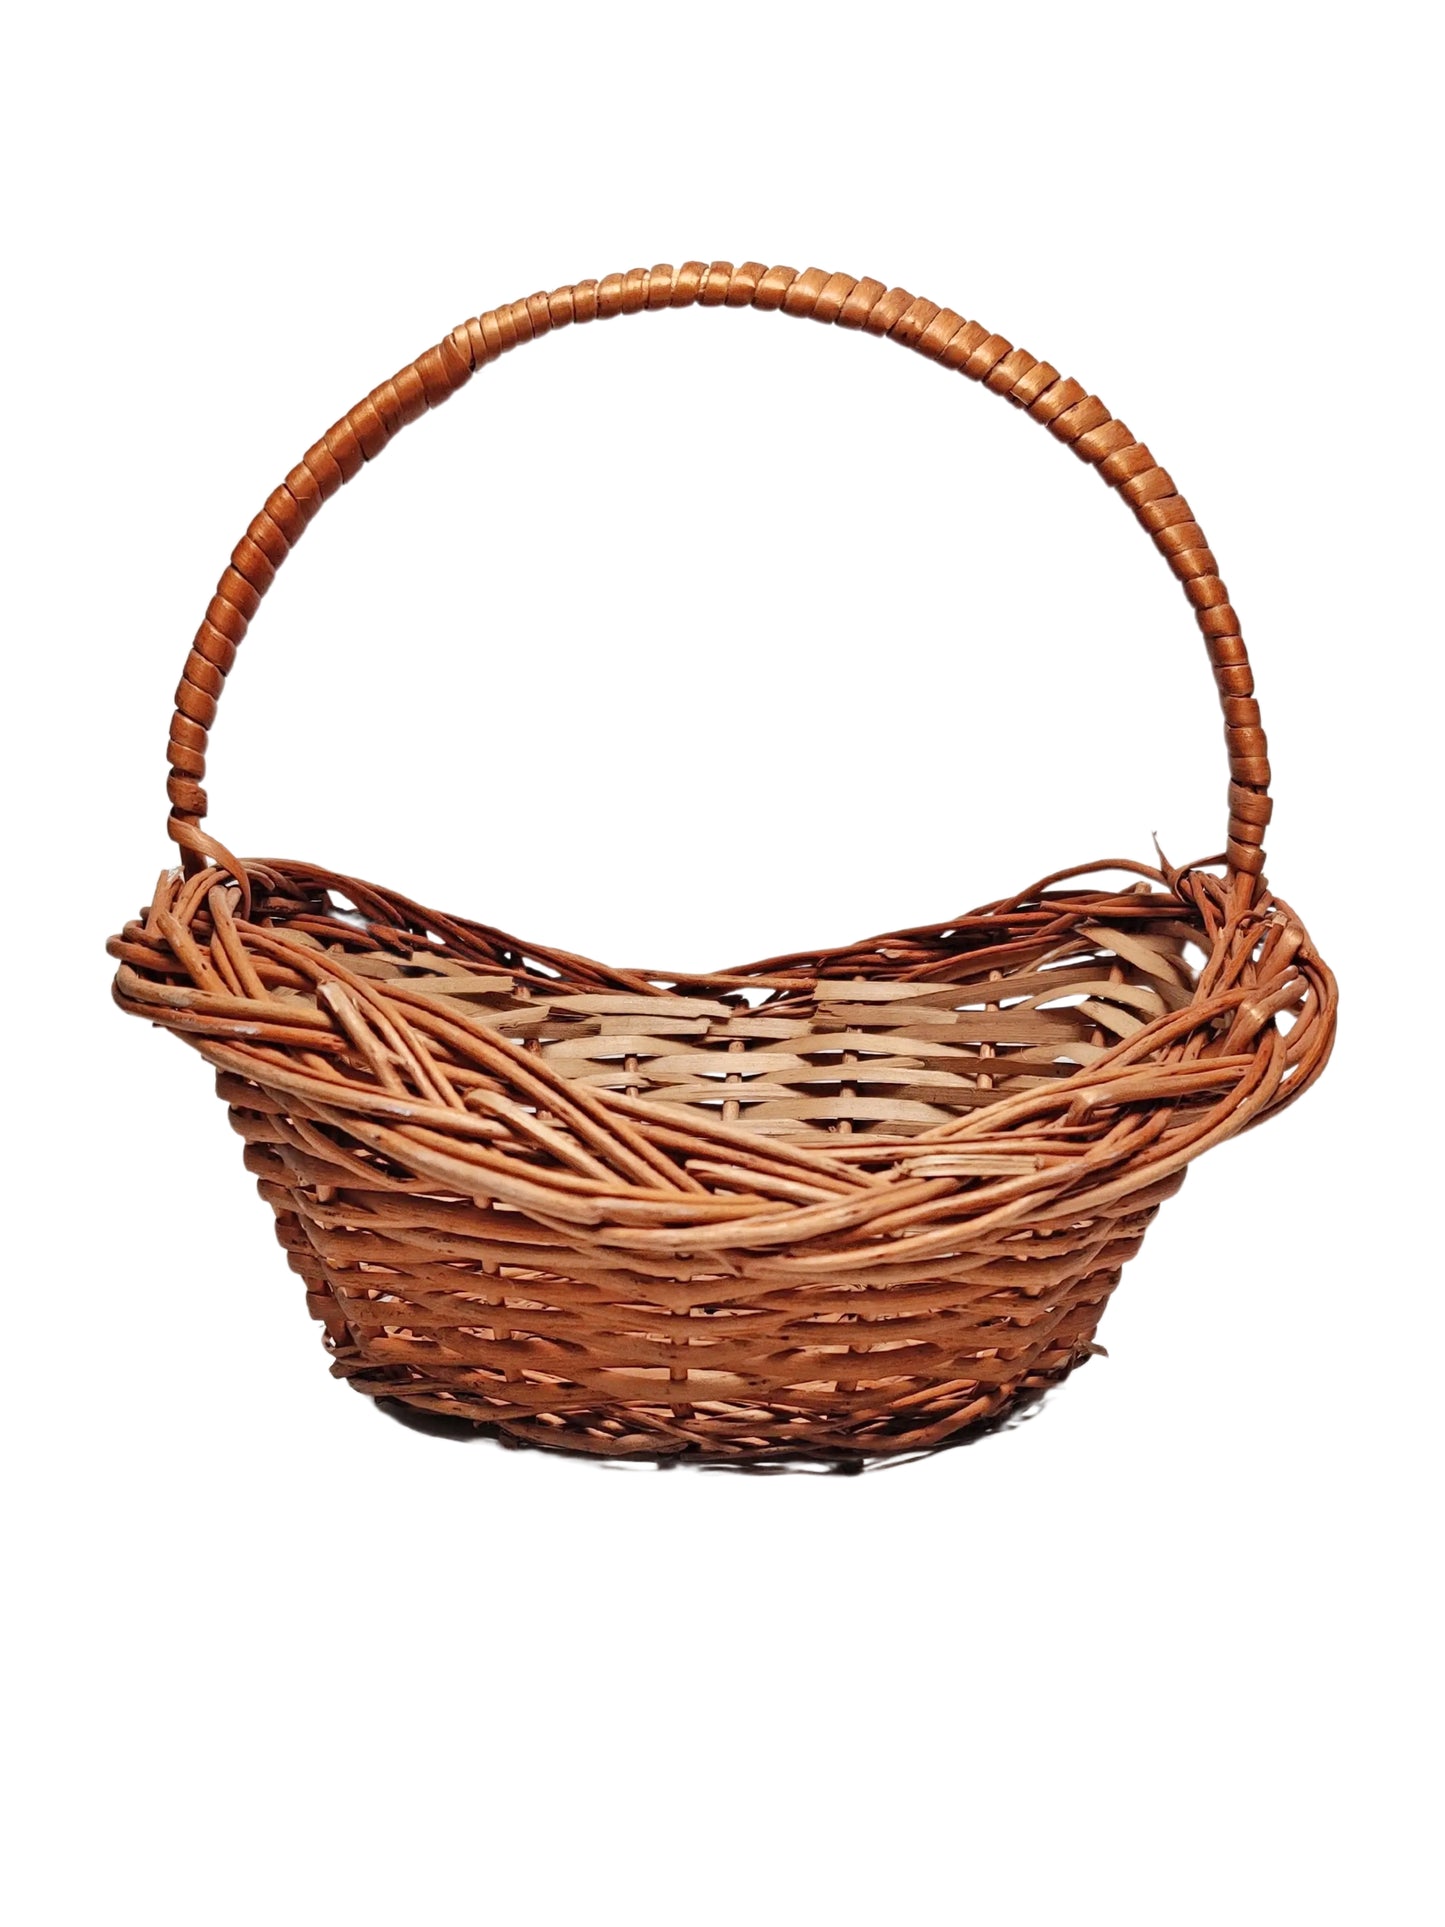 ARTSY® Oval Cane Basket: Perfect for Pooja and Multipurpose Storage, Pack of 1 Piece